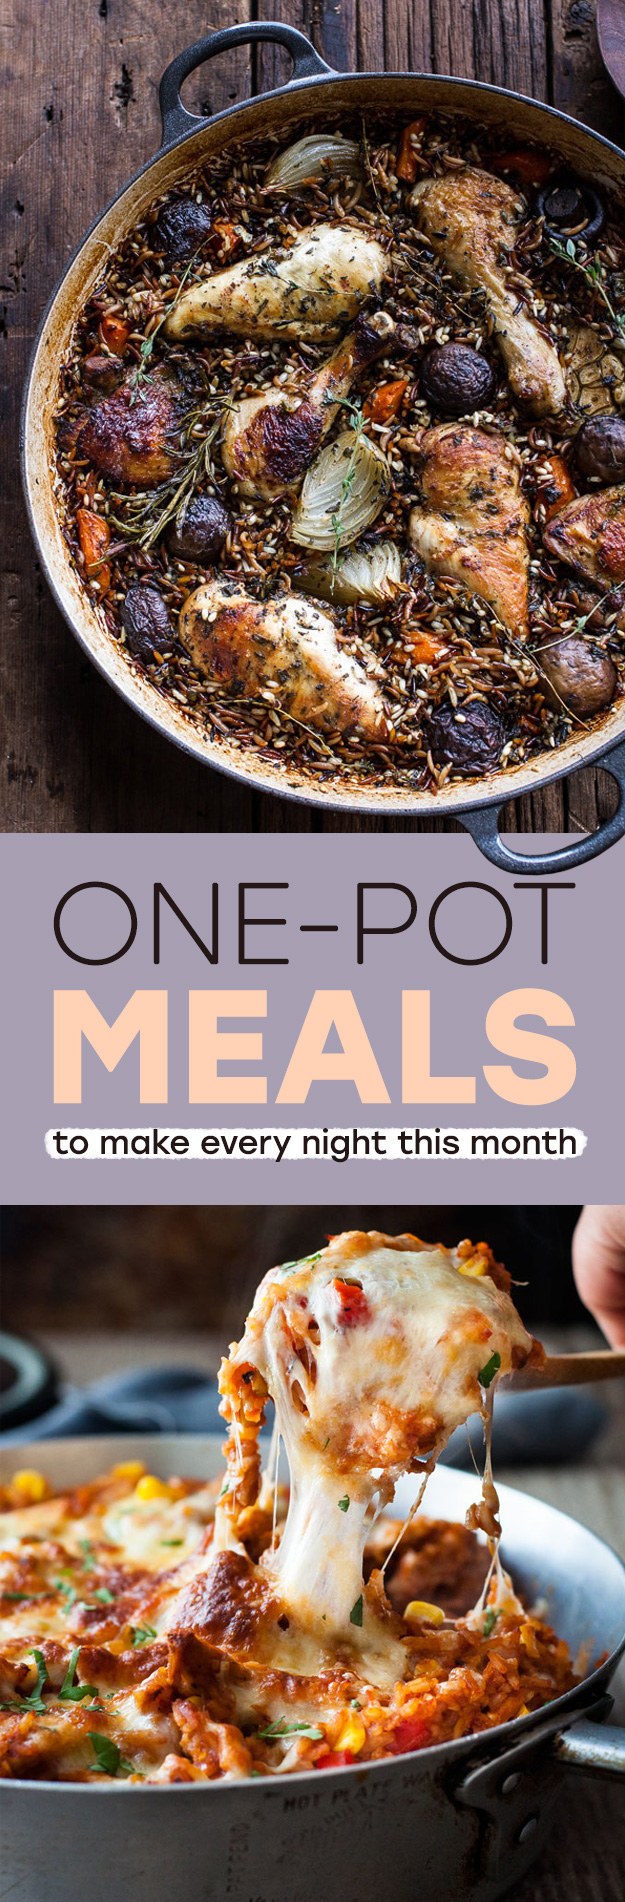 31 One-Pot Dinners To Make Every Night In December